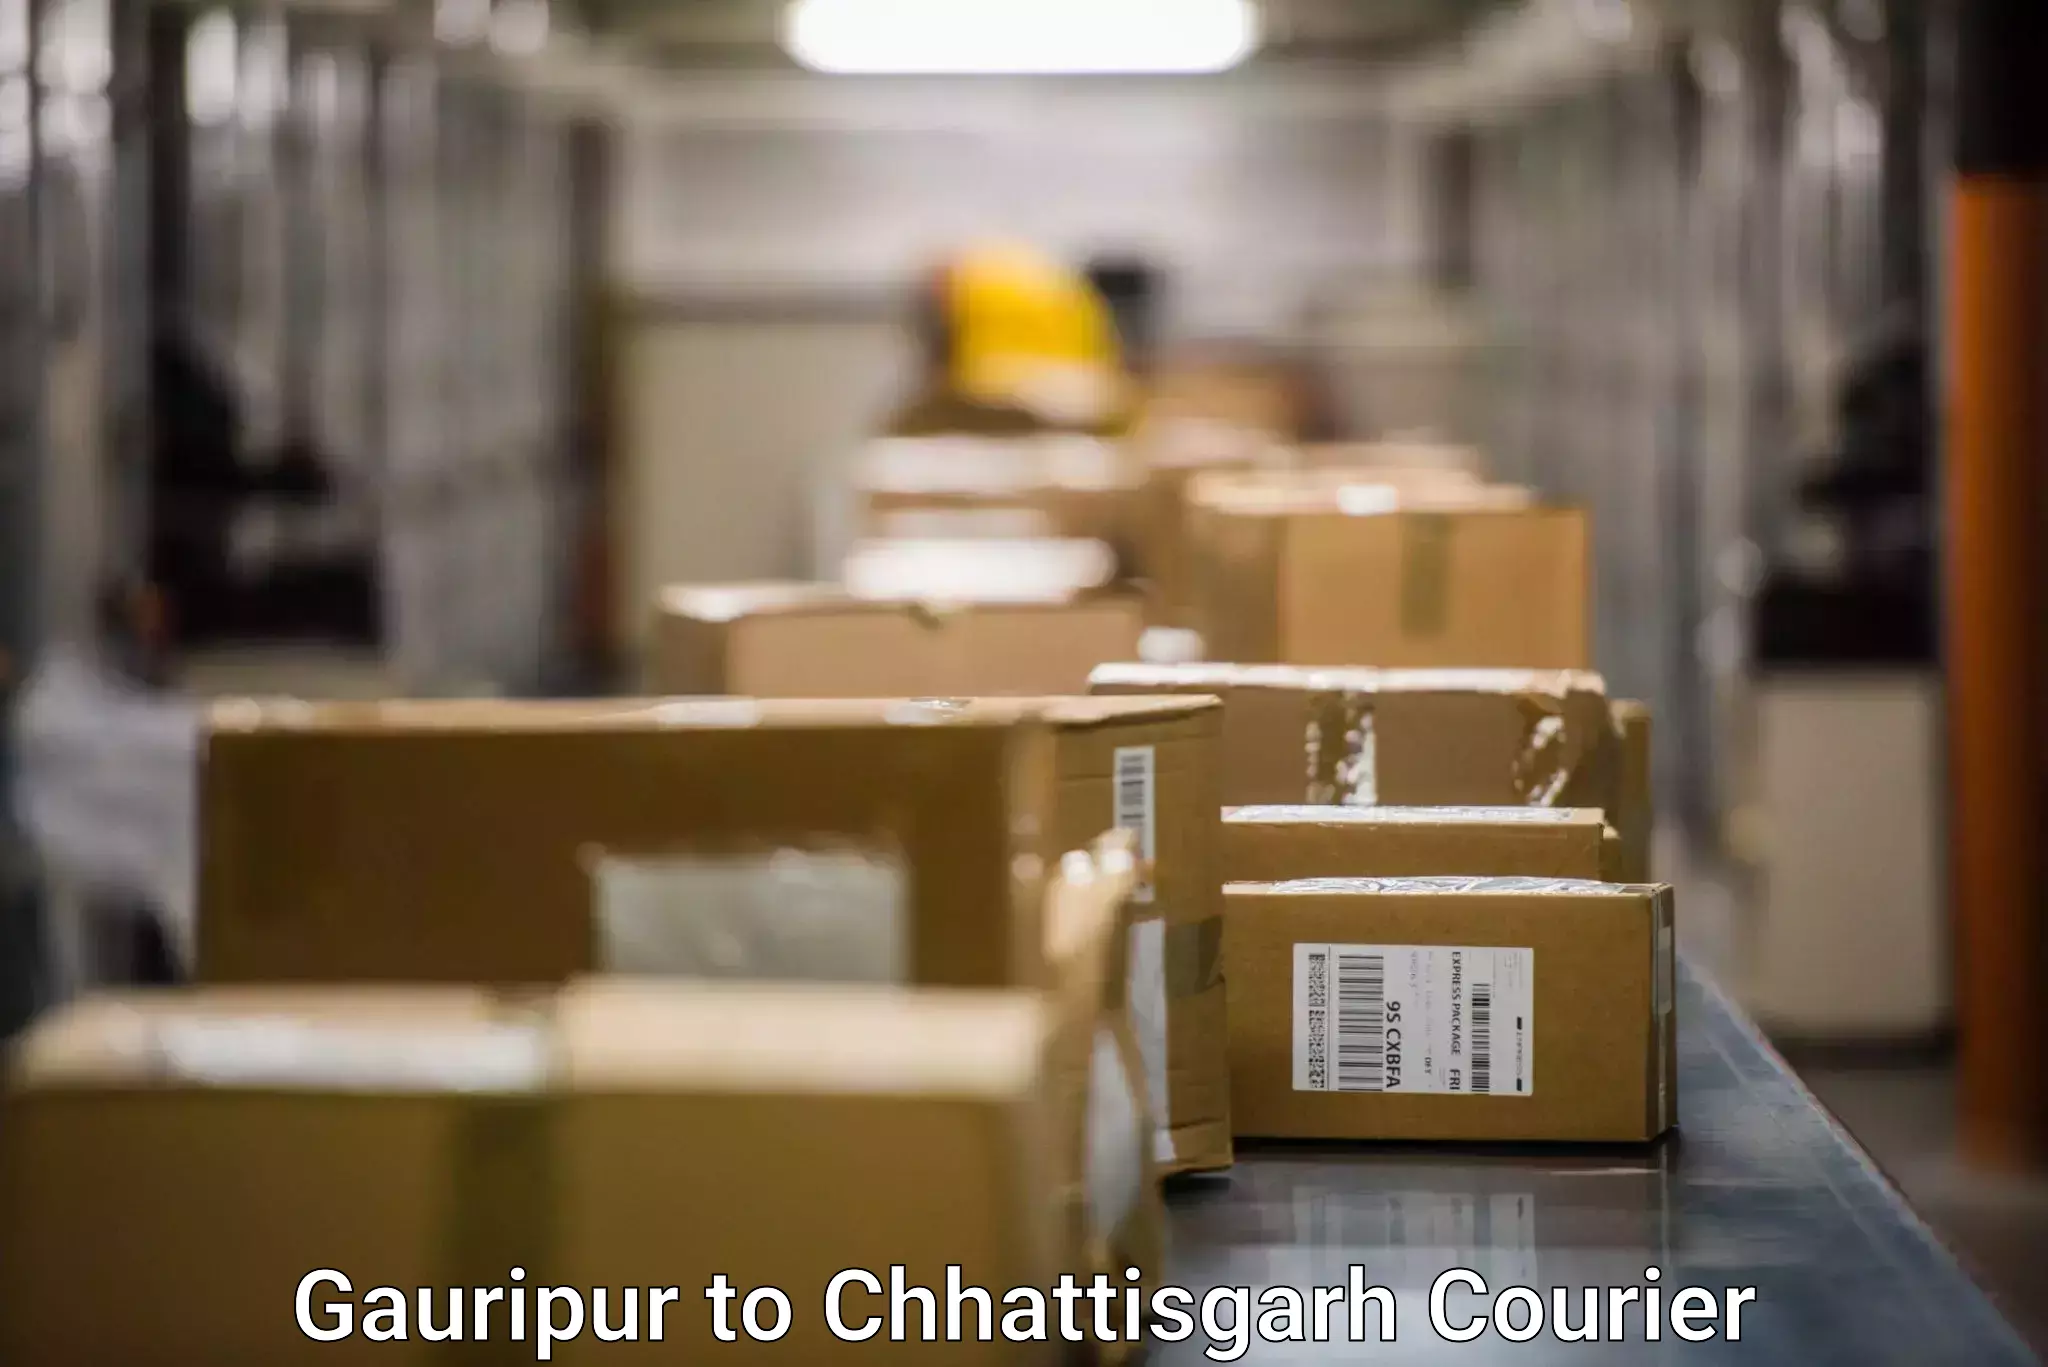 Reliable delivery network Gauripur to Raigarh Chhattisgarh